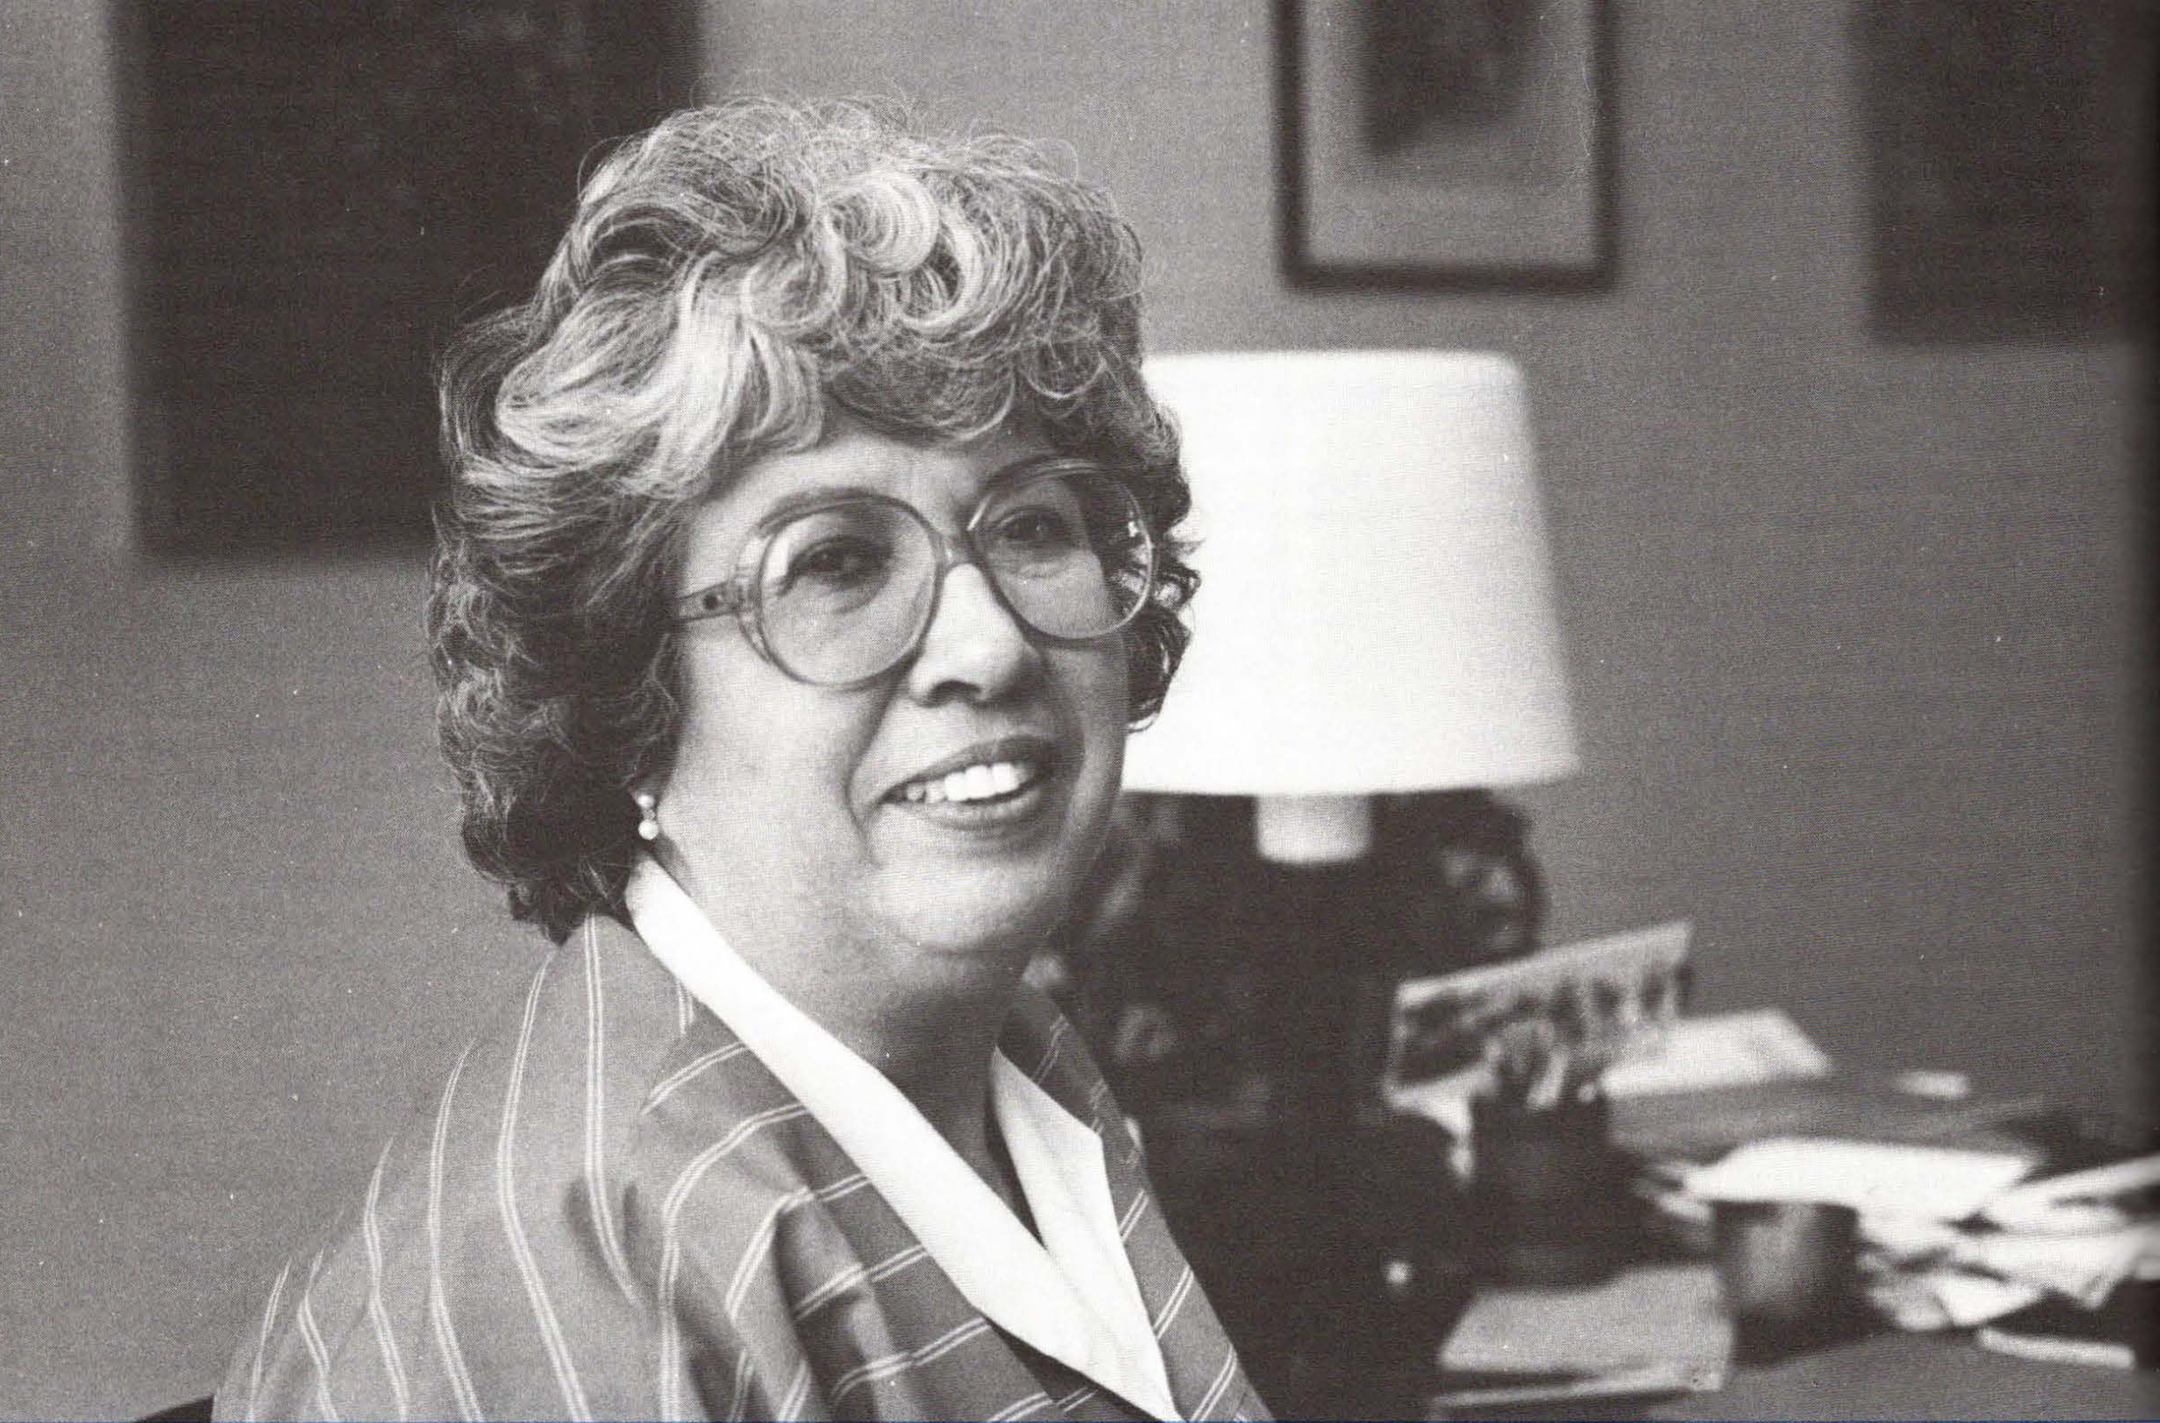 Black and white photo of a woman wearing glasses, smiling as she sits at her desk and looks at the camera